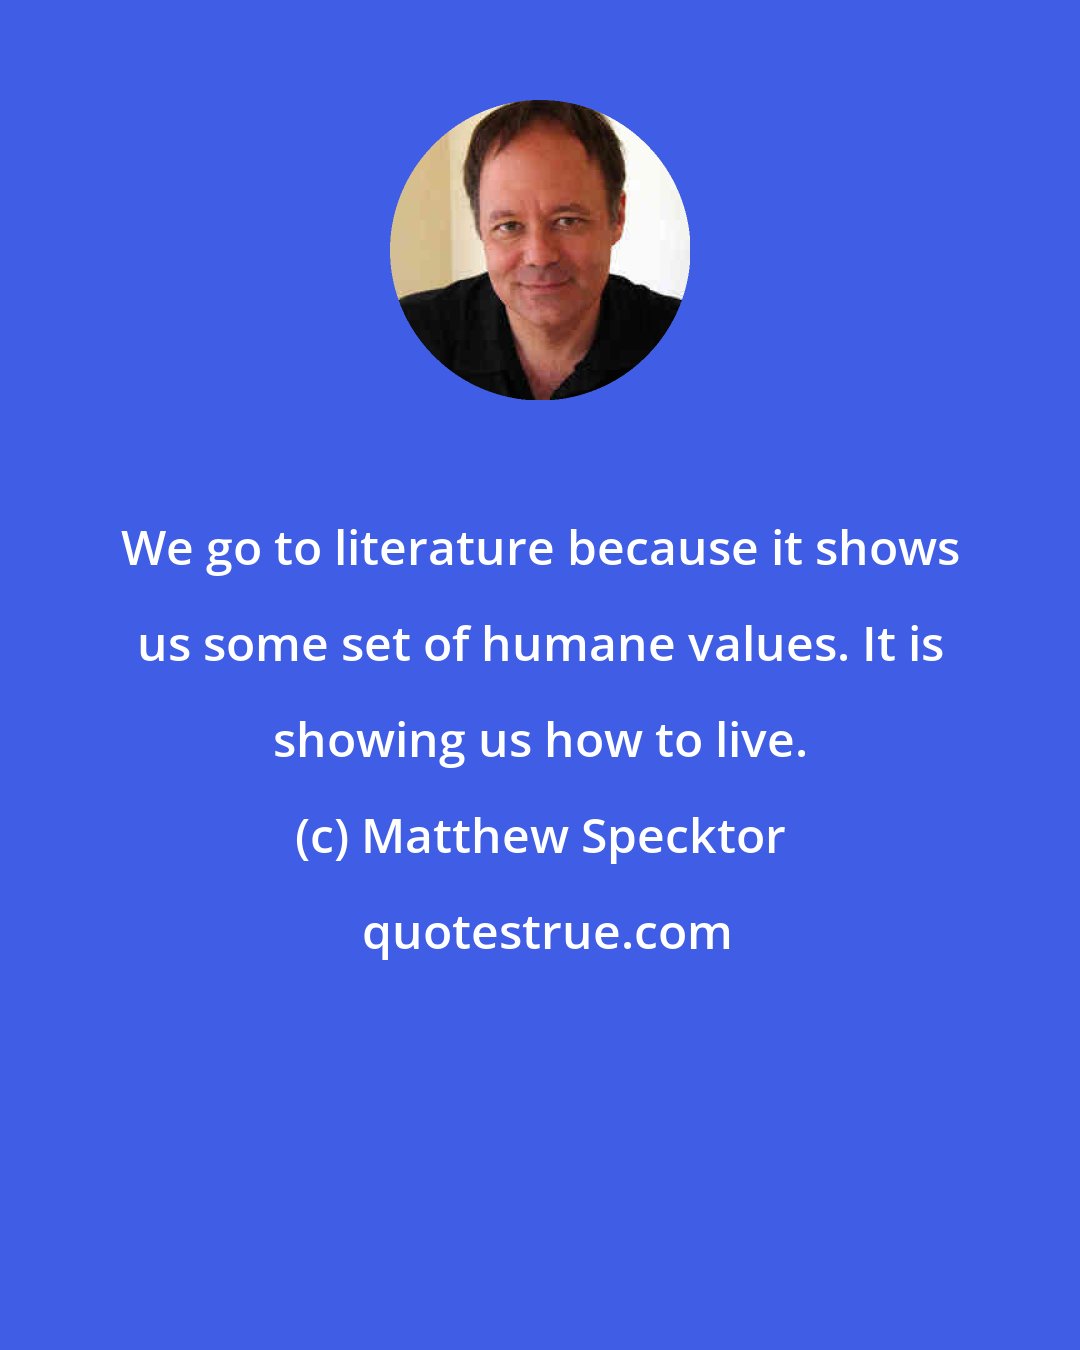 Matthew Specktor: We go to literature because it shows us some set of humane values. It is showing us how to live.